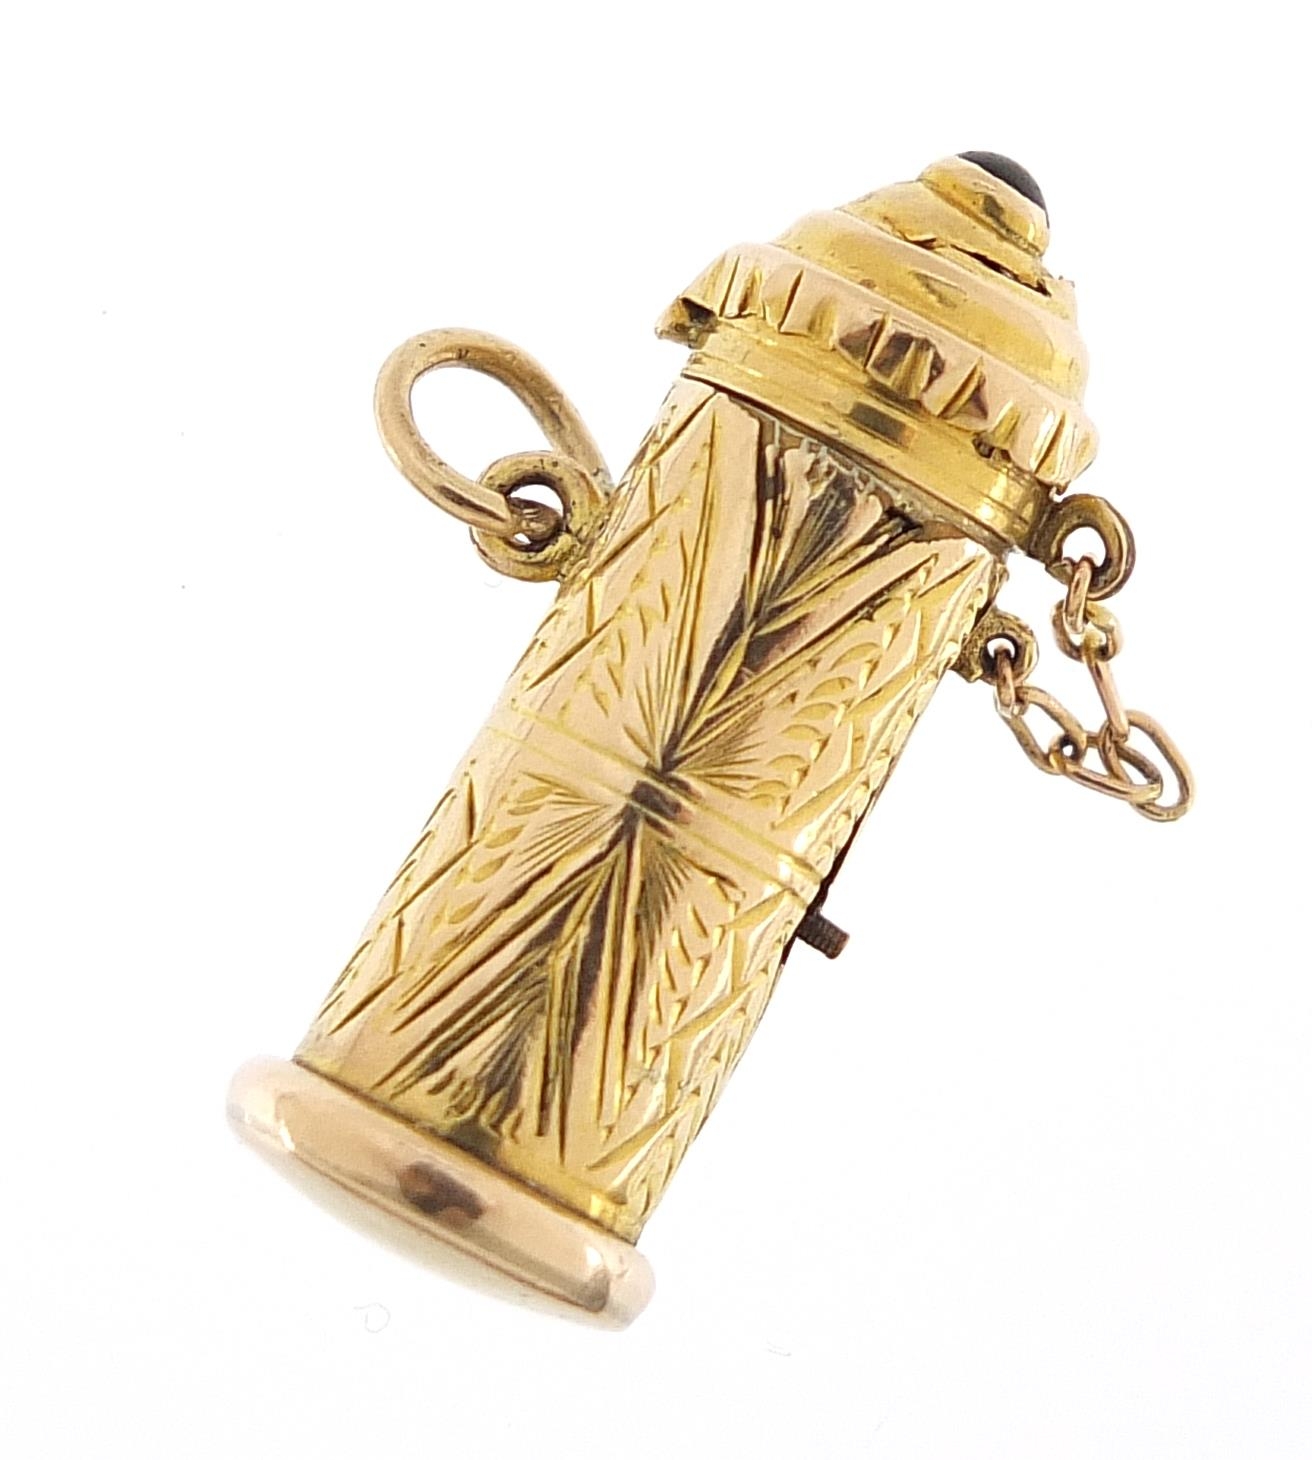 9ct gold jack in the box design charm with spring loaded figure, the lid set with a cabochon green - Image 2 of 3